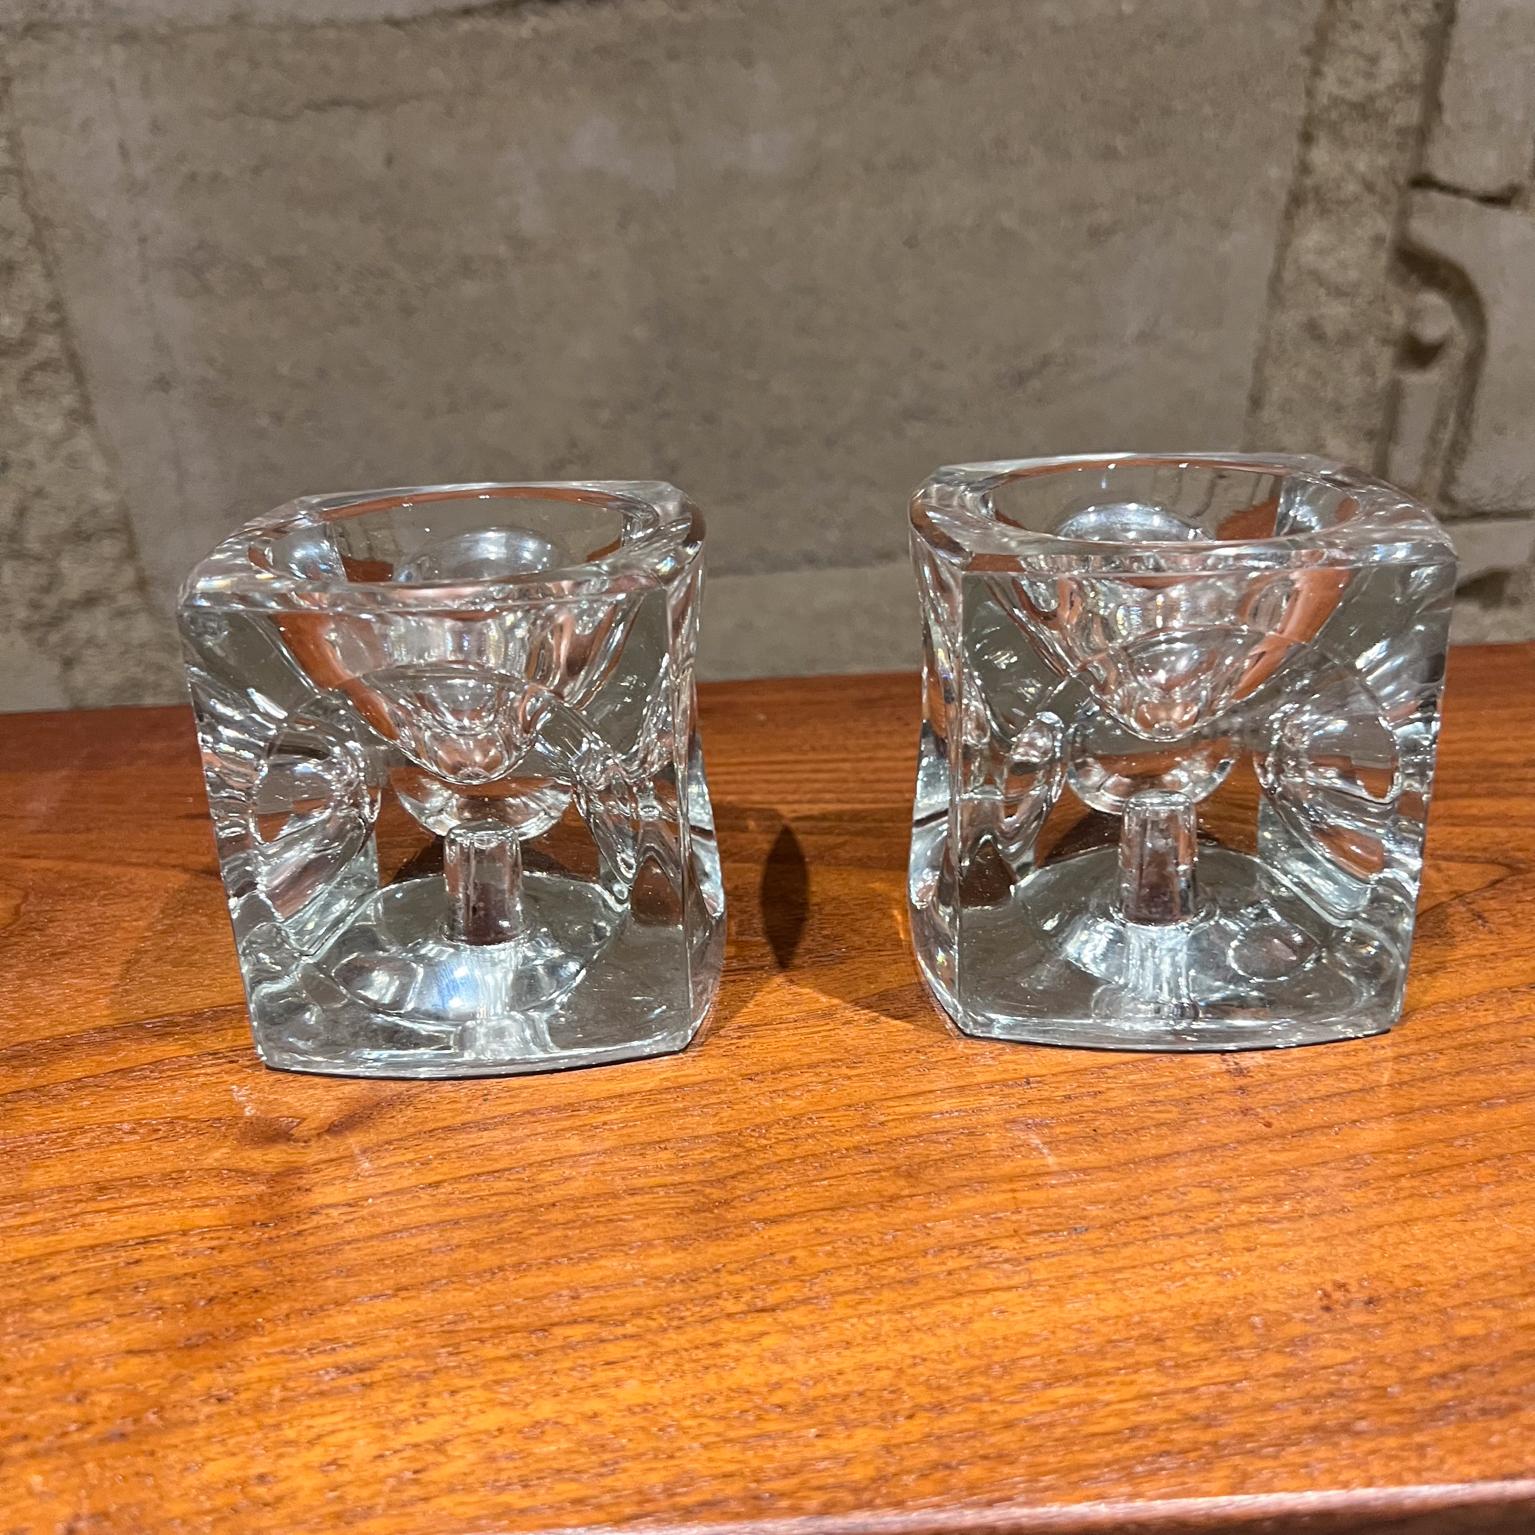 
MCM Pair Crystal Glass Cube Candle Holders
3.75 x 3.75 x 3.75 candle .75
Preowned original vintage condition
See all images provided.